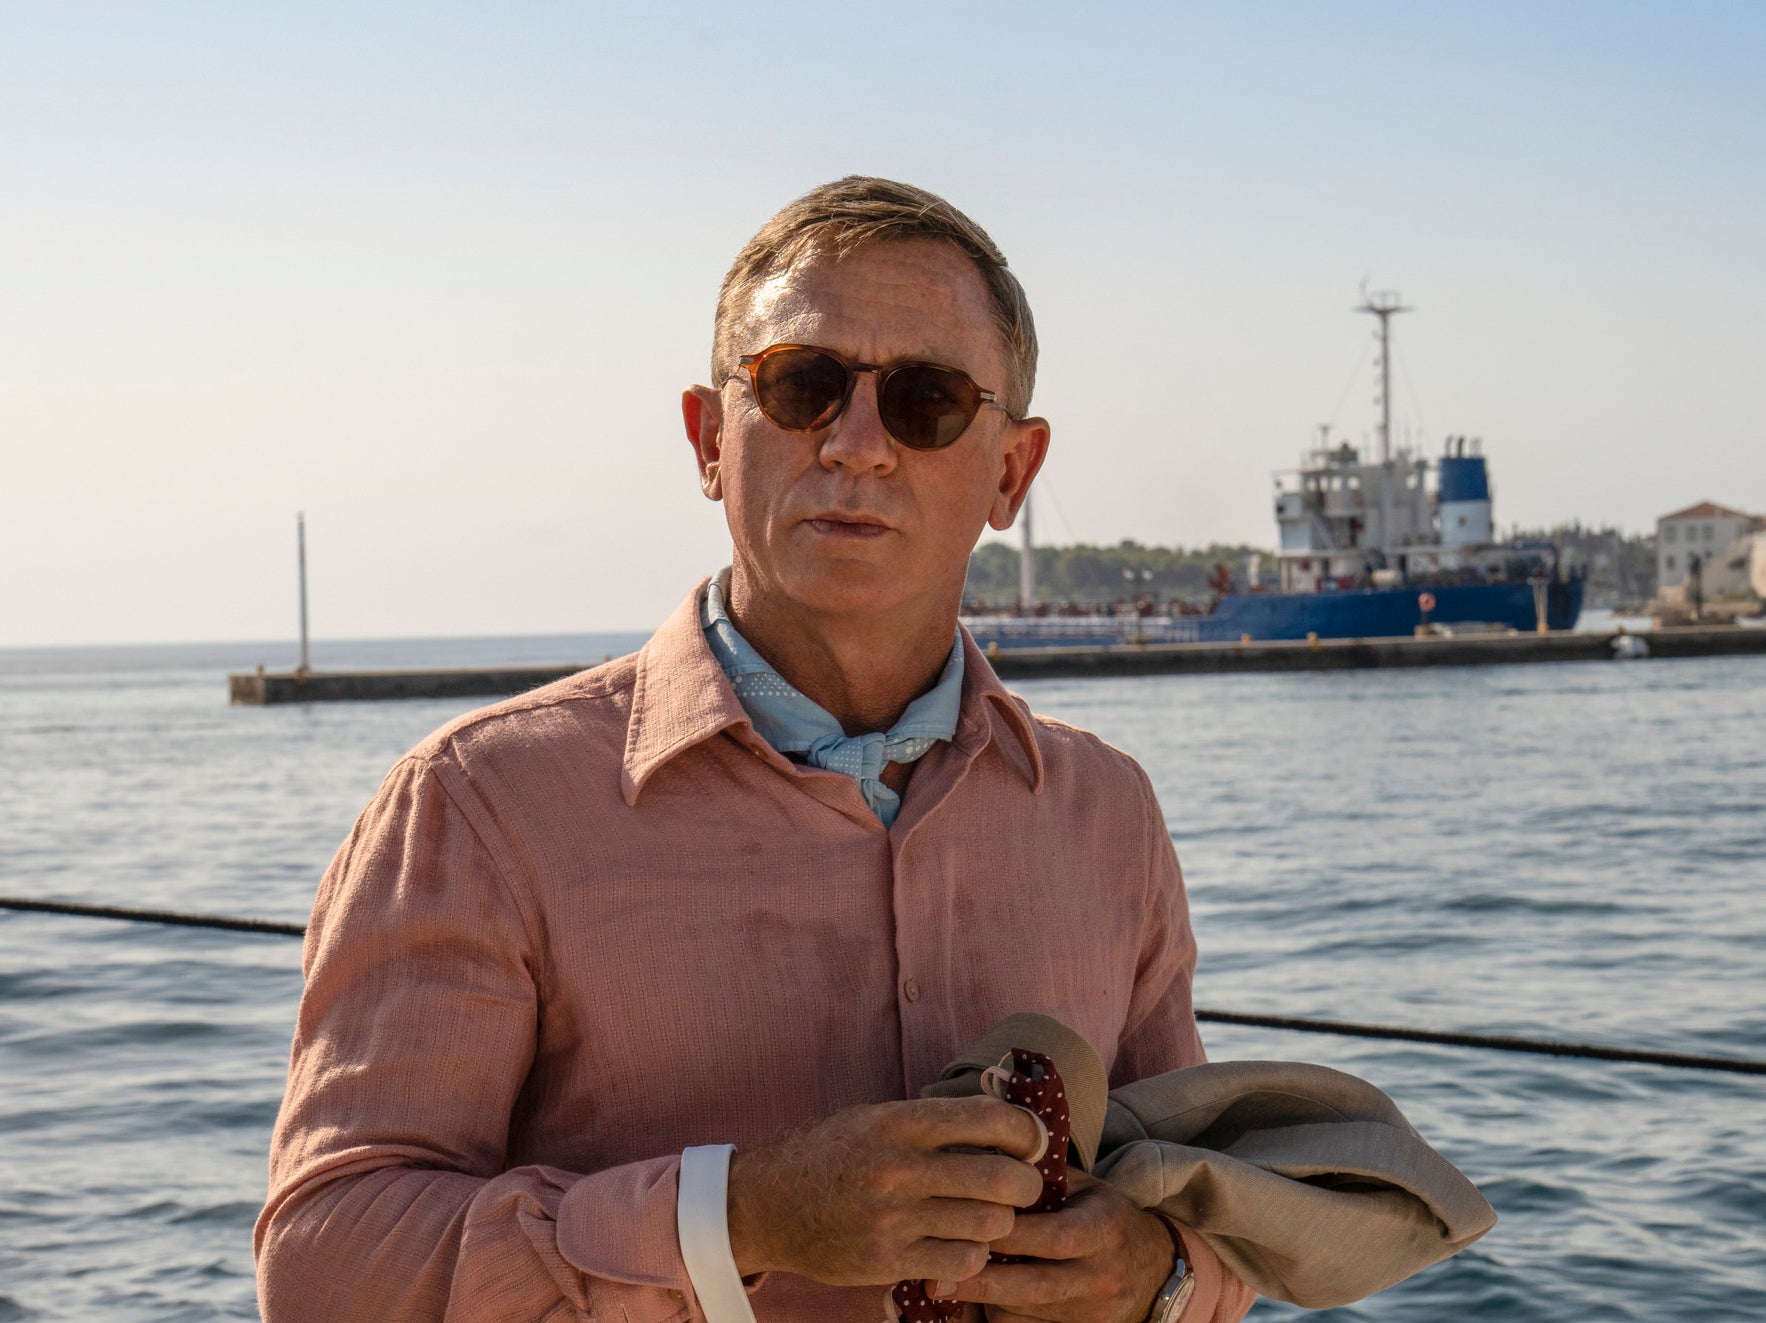 Blanc cheque: Daniel Craig as super-sleuth Benoit in ‘Glass Onion: A Knives Out Mystery'